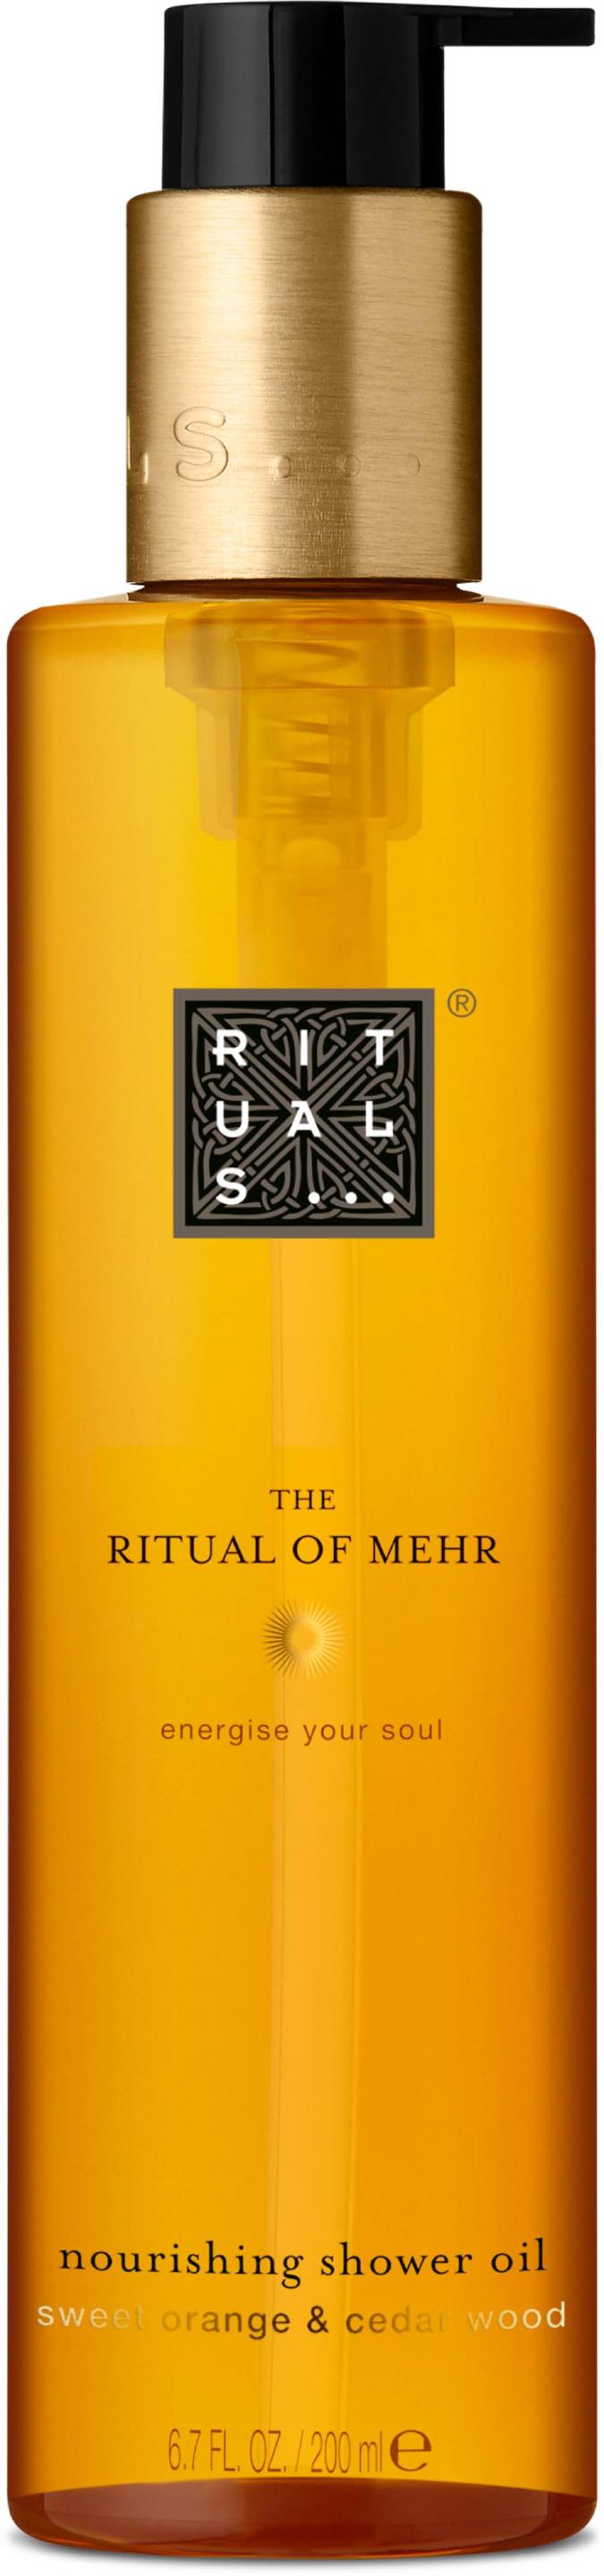 The Ritual Of Mehr Shower Oil 200 ml | lyko.com